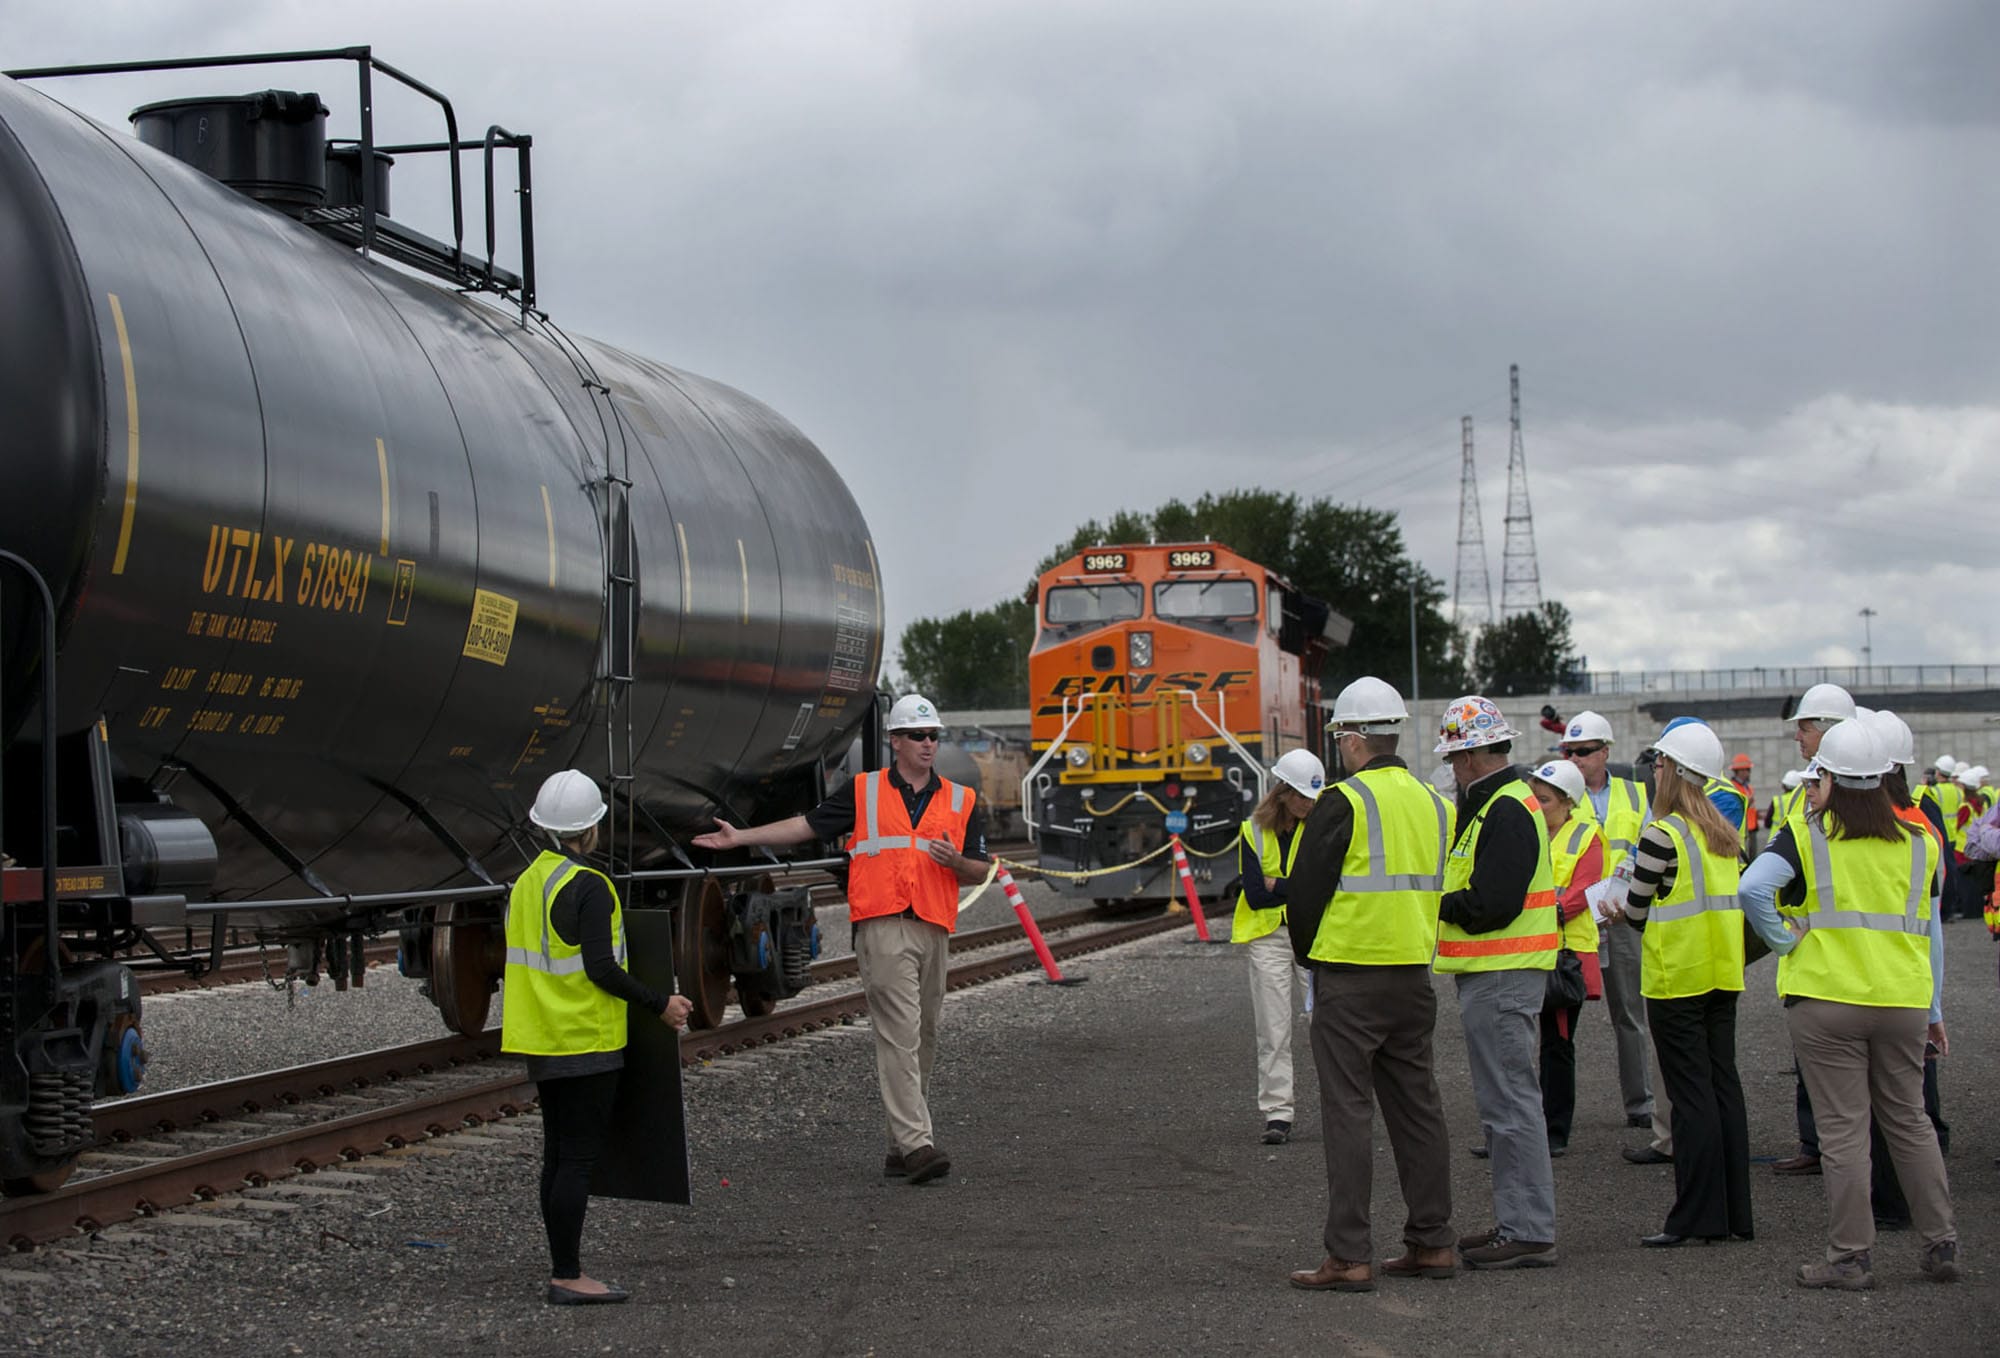 John Hack of Tesoro, second from left in orange vest, shares information about tank cars with invited guests at the Port of Vancouver's Terminal 5 on Thursday afternoon, Sept. 17, 2015.